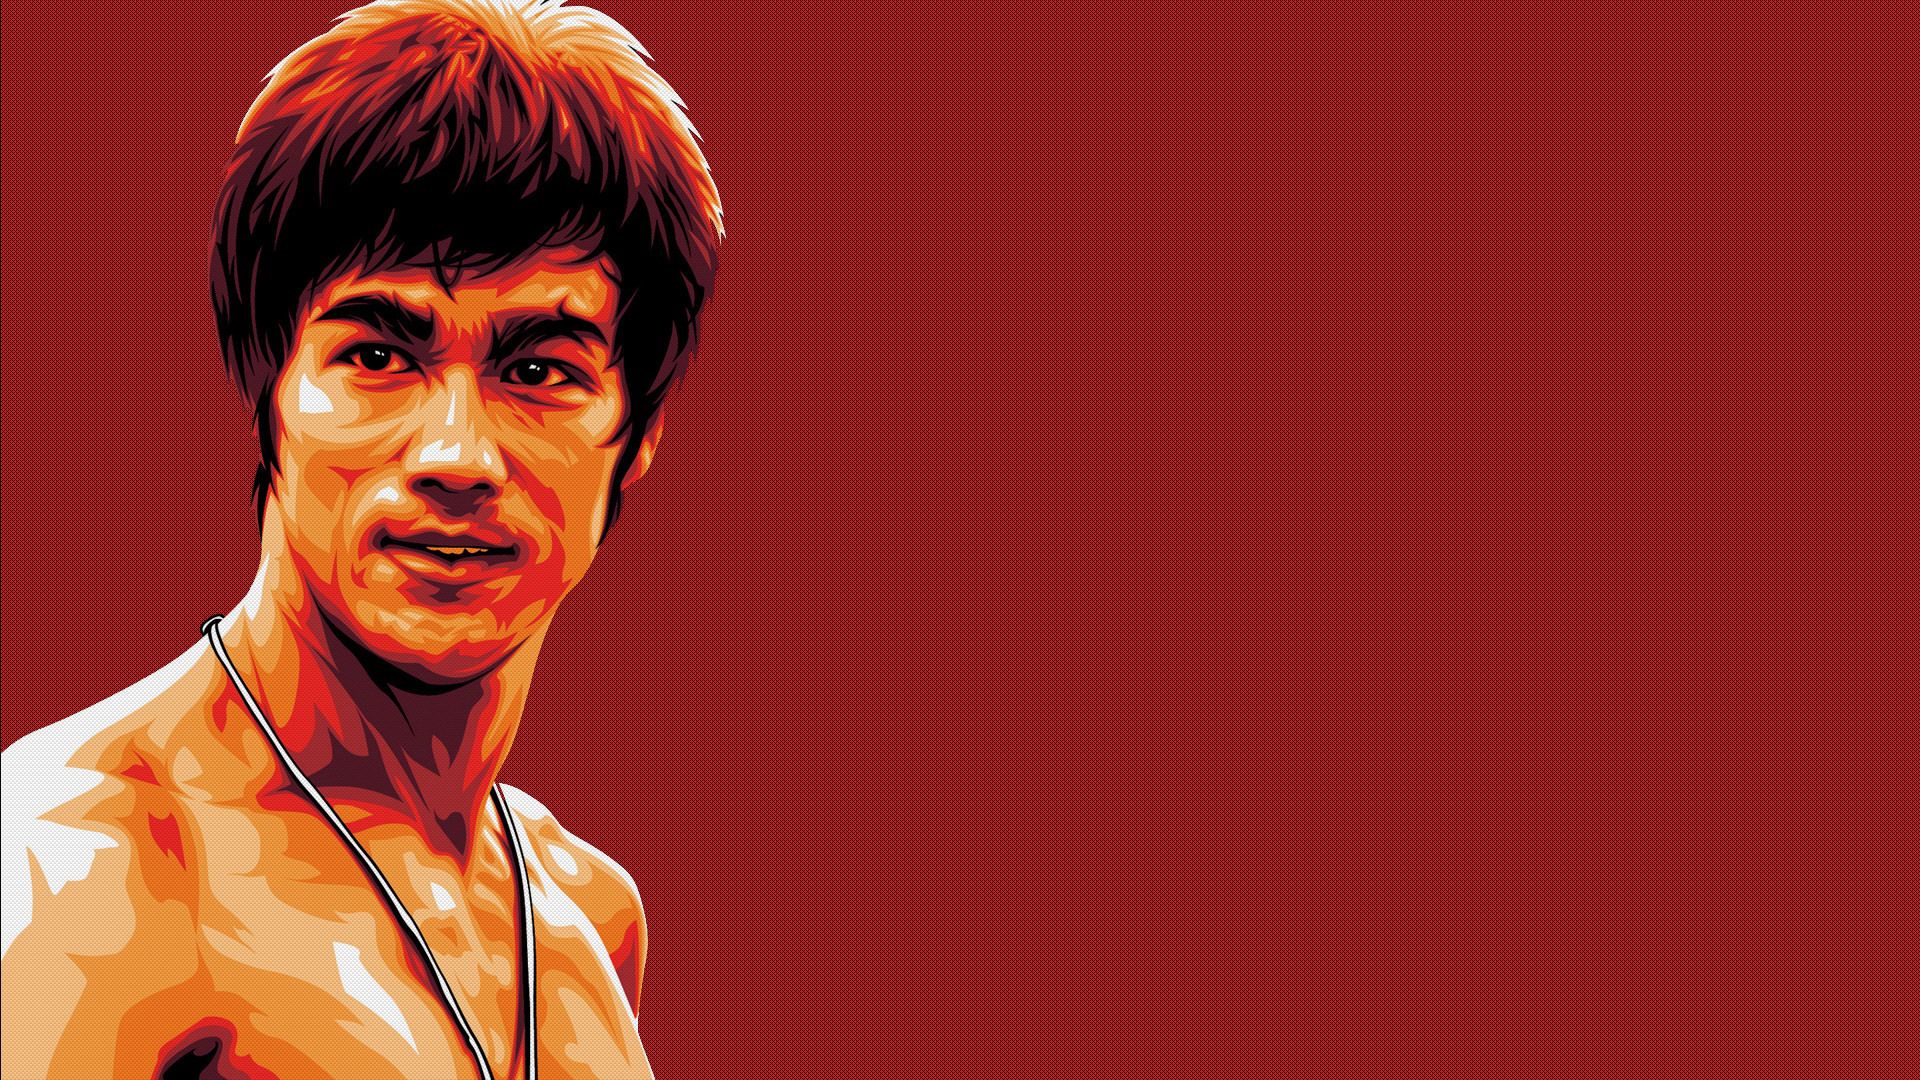 HD Background Bruce Lee Martial Arts Fighter Red Painting ...